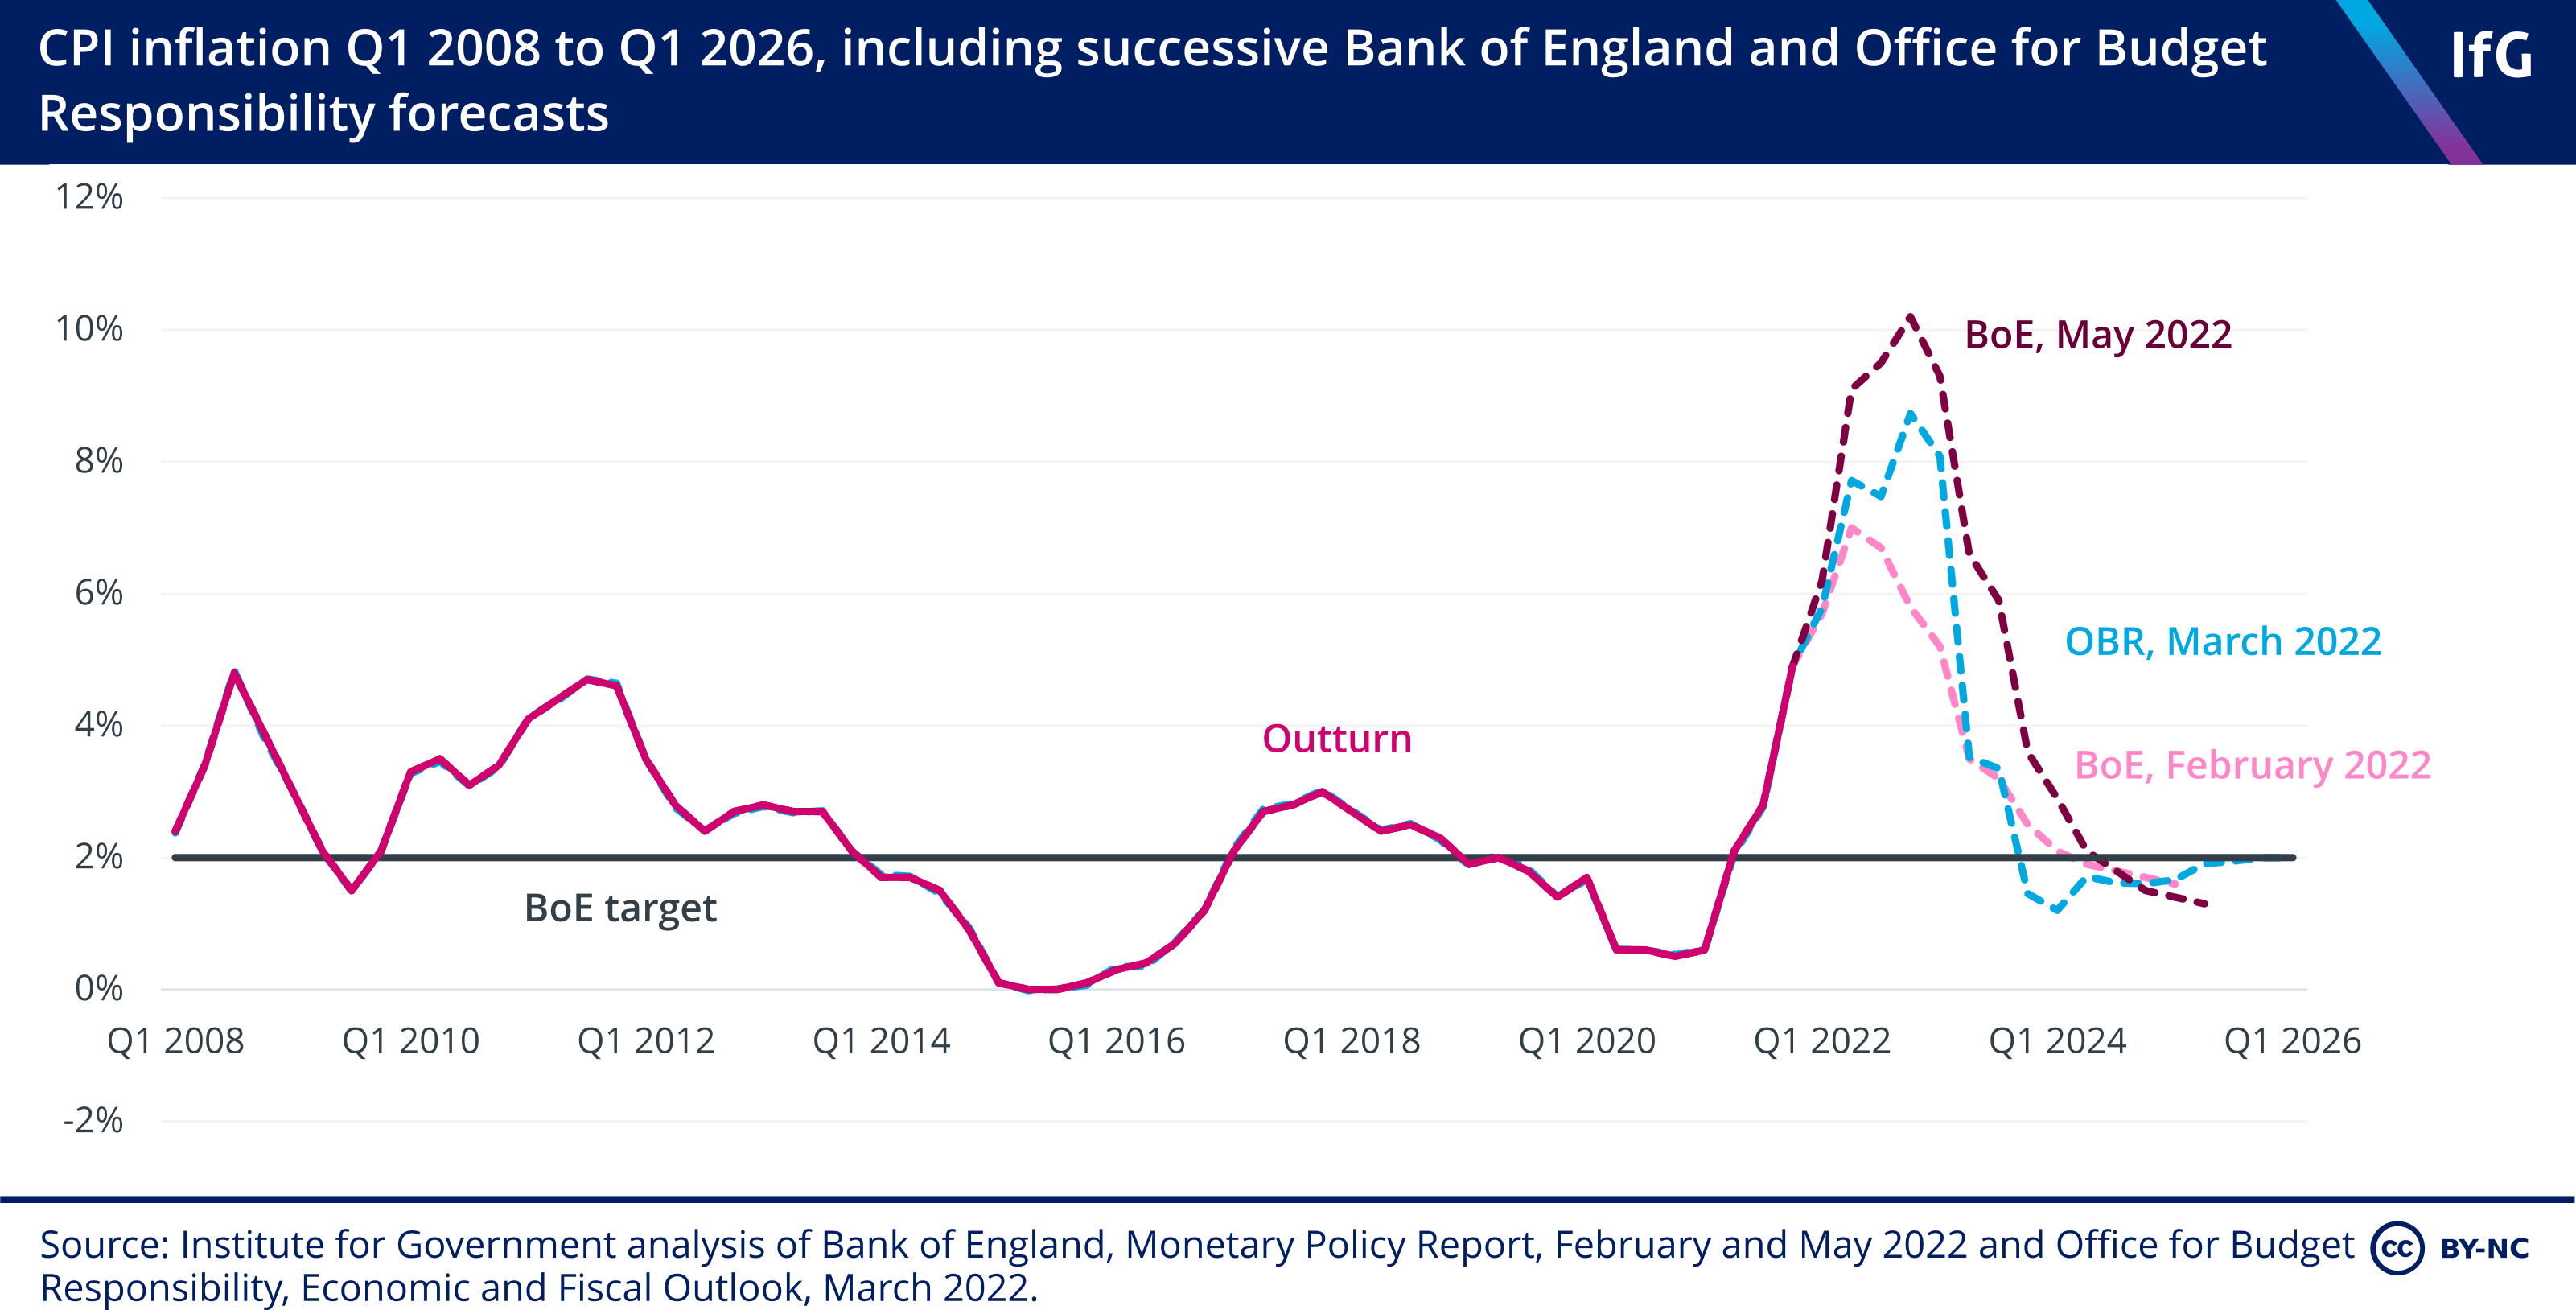 CPI inflation Q1 2008 to Q1 2026, including successive Bank of England and OBR forecasts